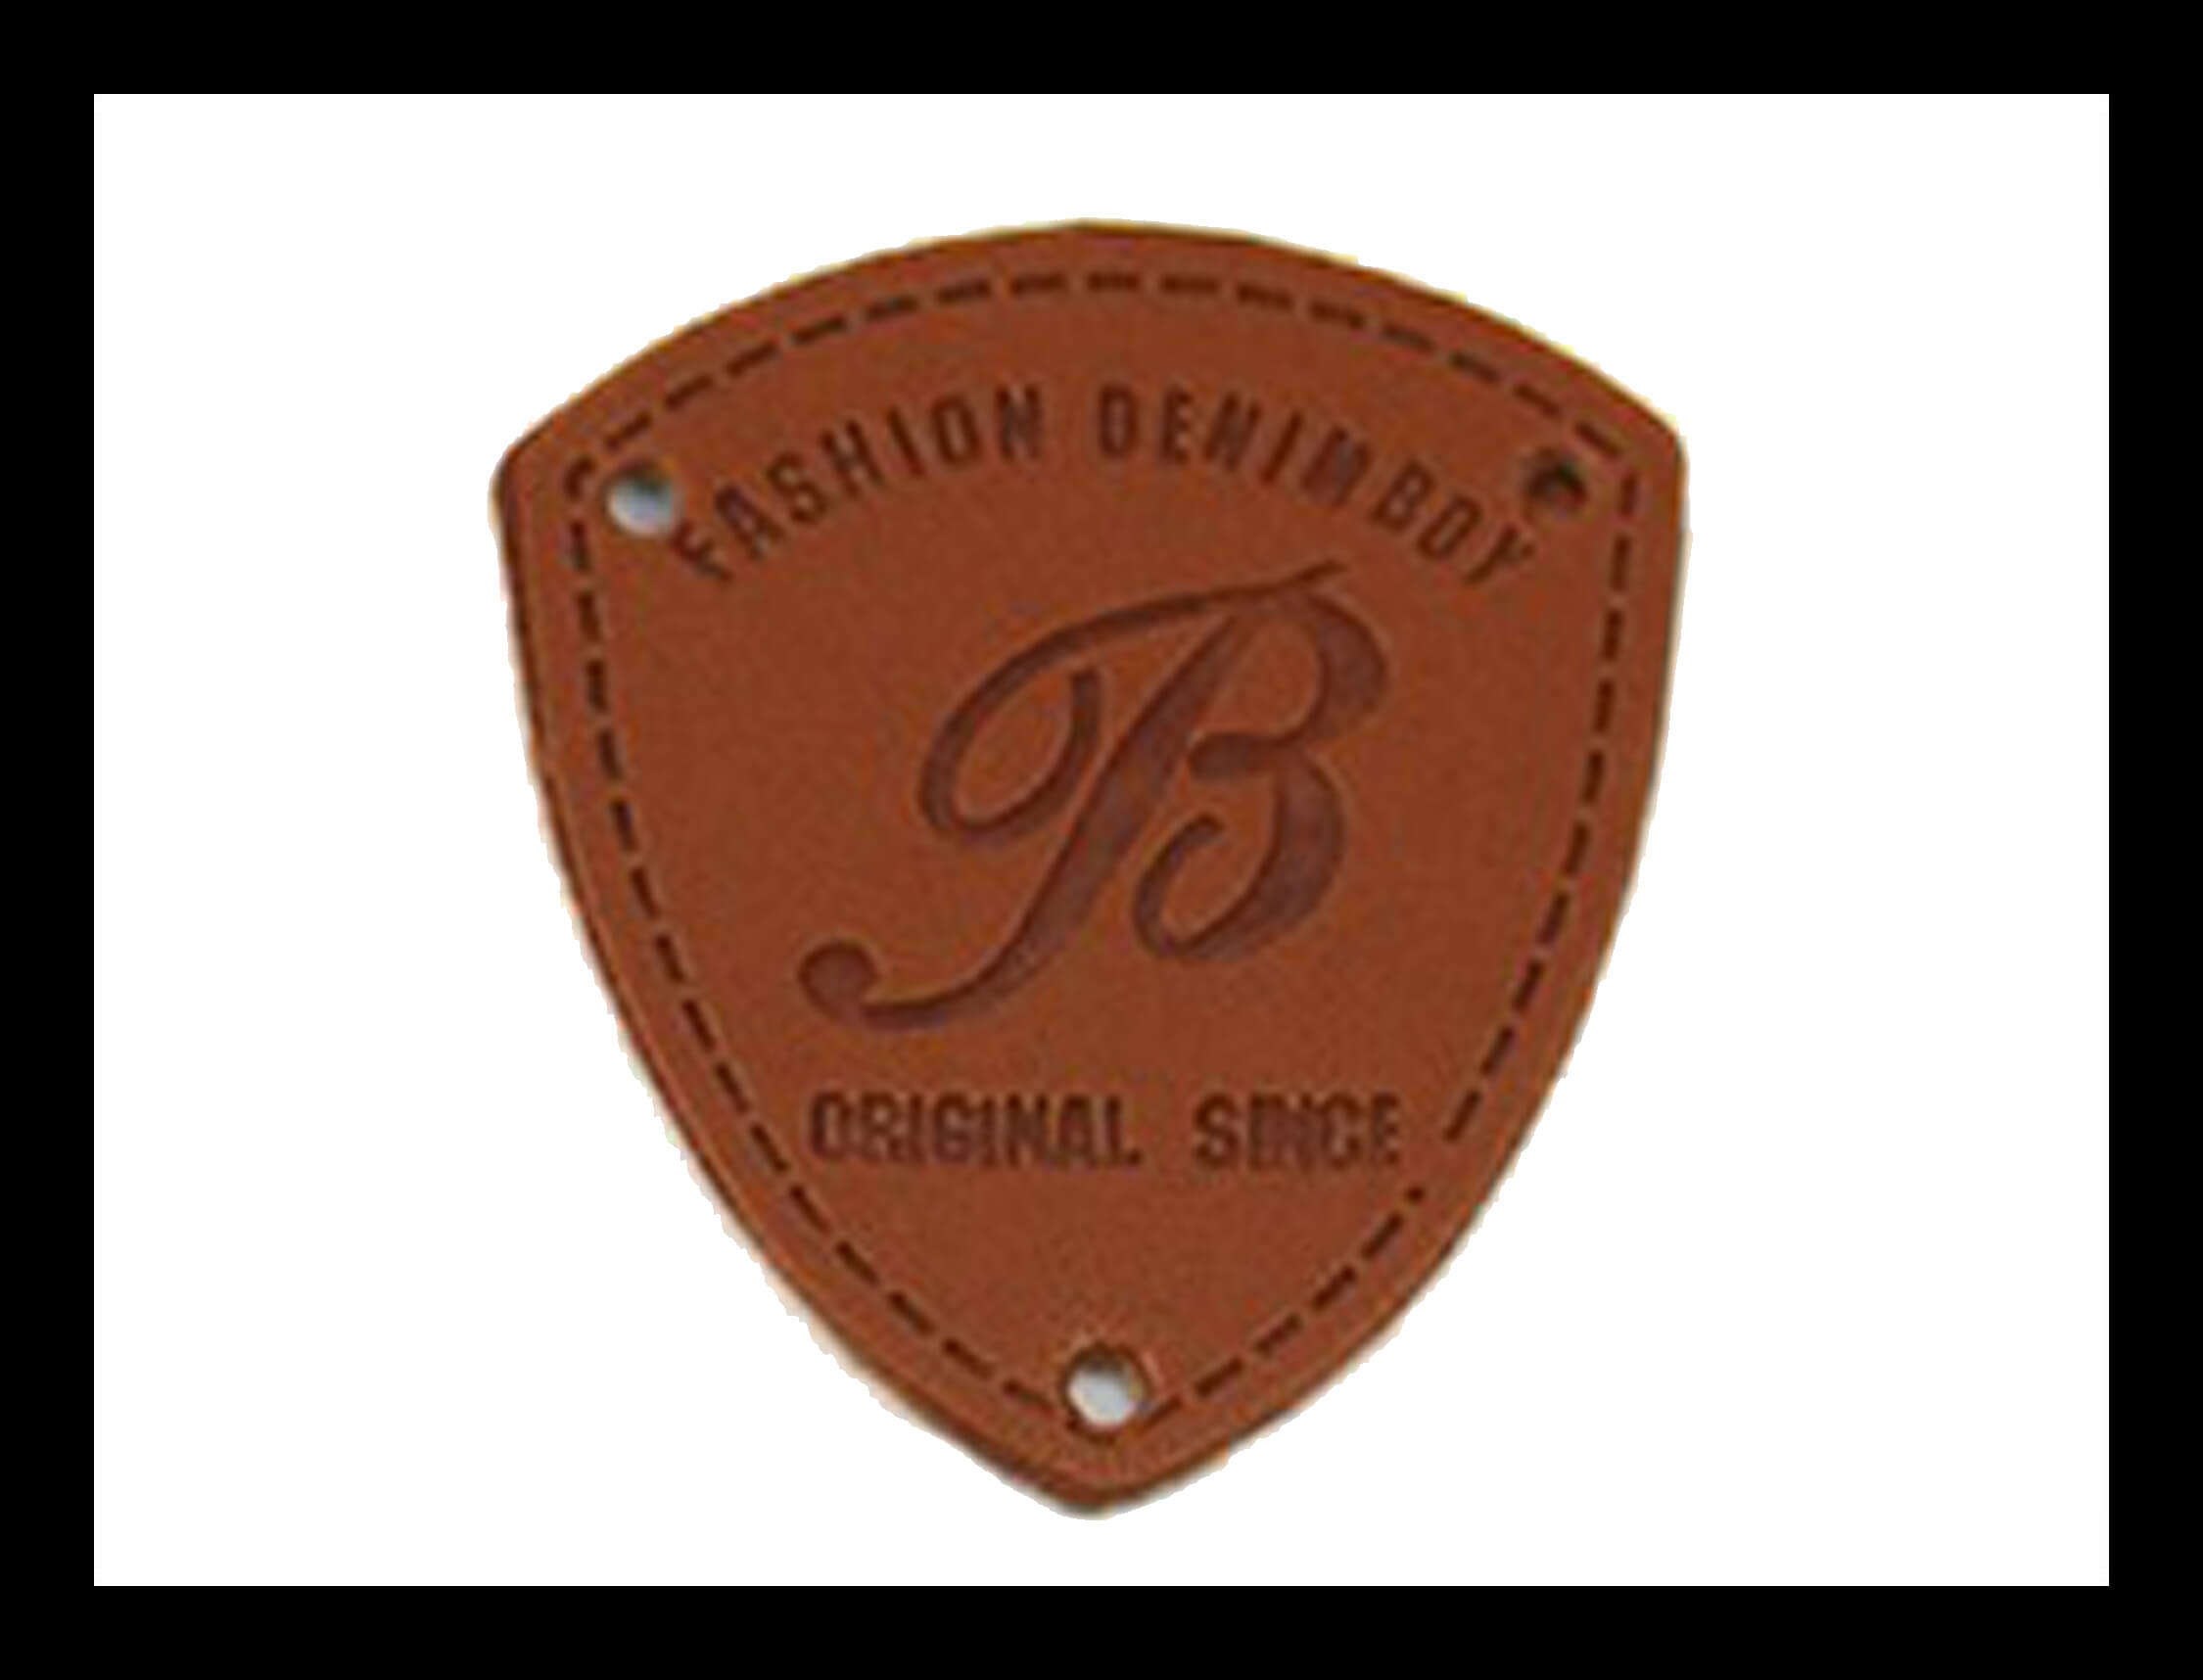 PERSONALIZED Leather PATCH, VELCRO Name Patch 